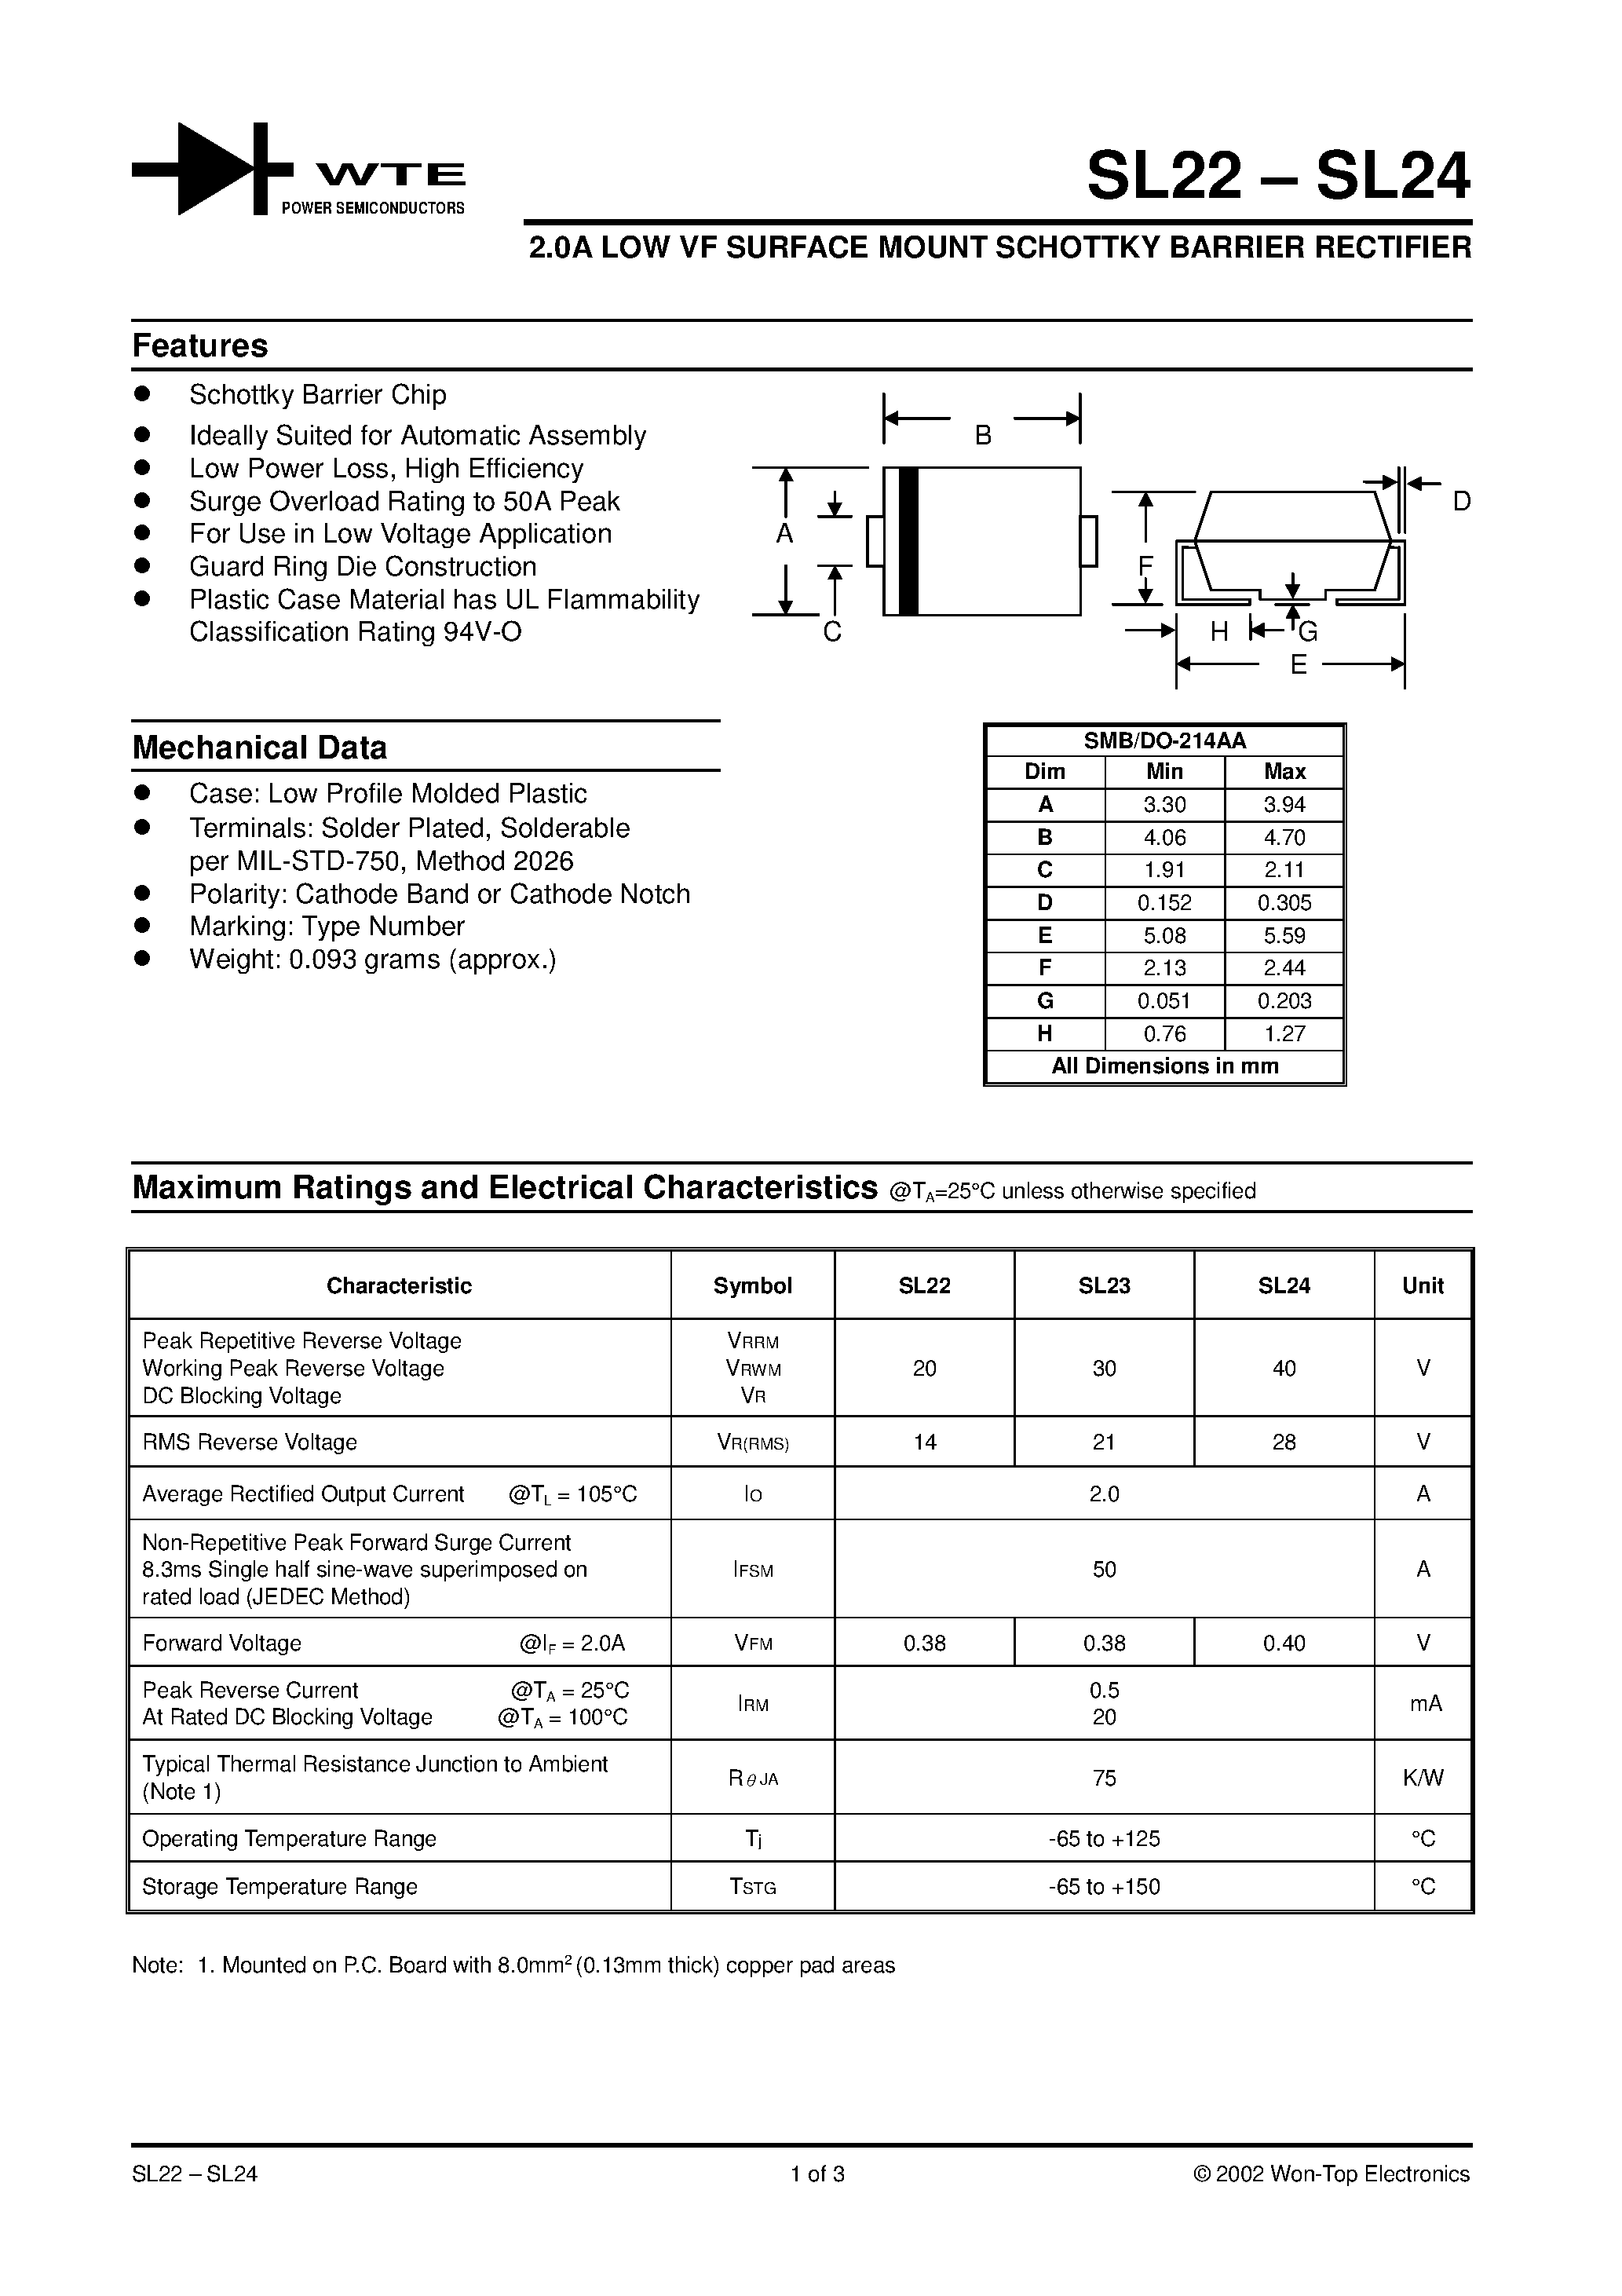 Datasheet SL24-T1 - 2.0A LOW VF SURFACE MOUNT SCHOTTKY BARRIER RECTIFIER page 1